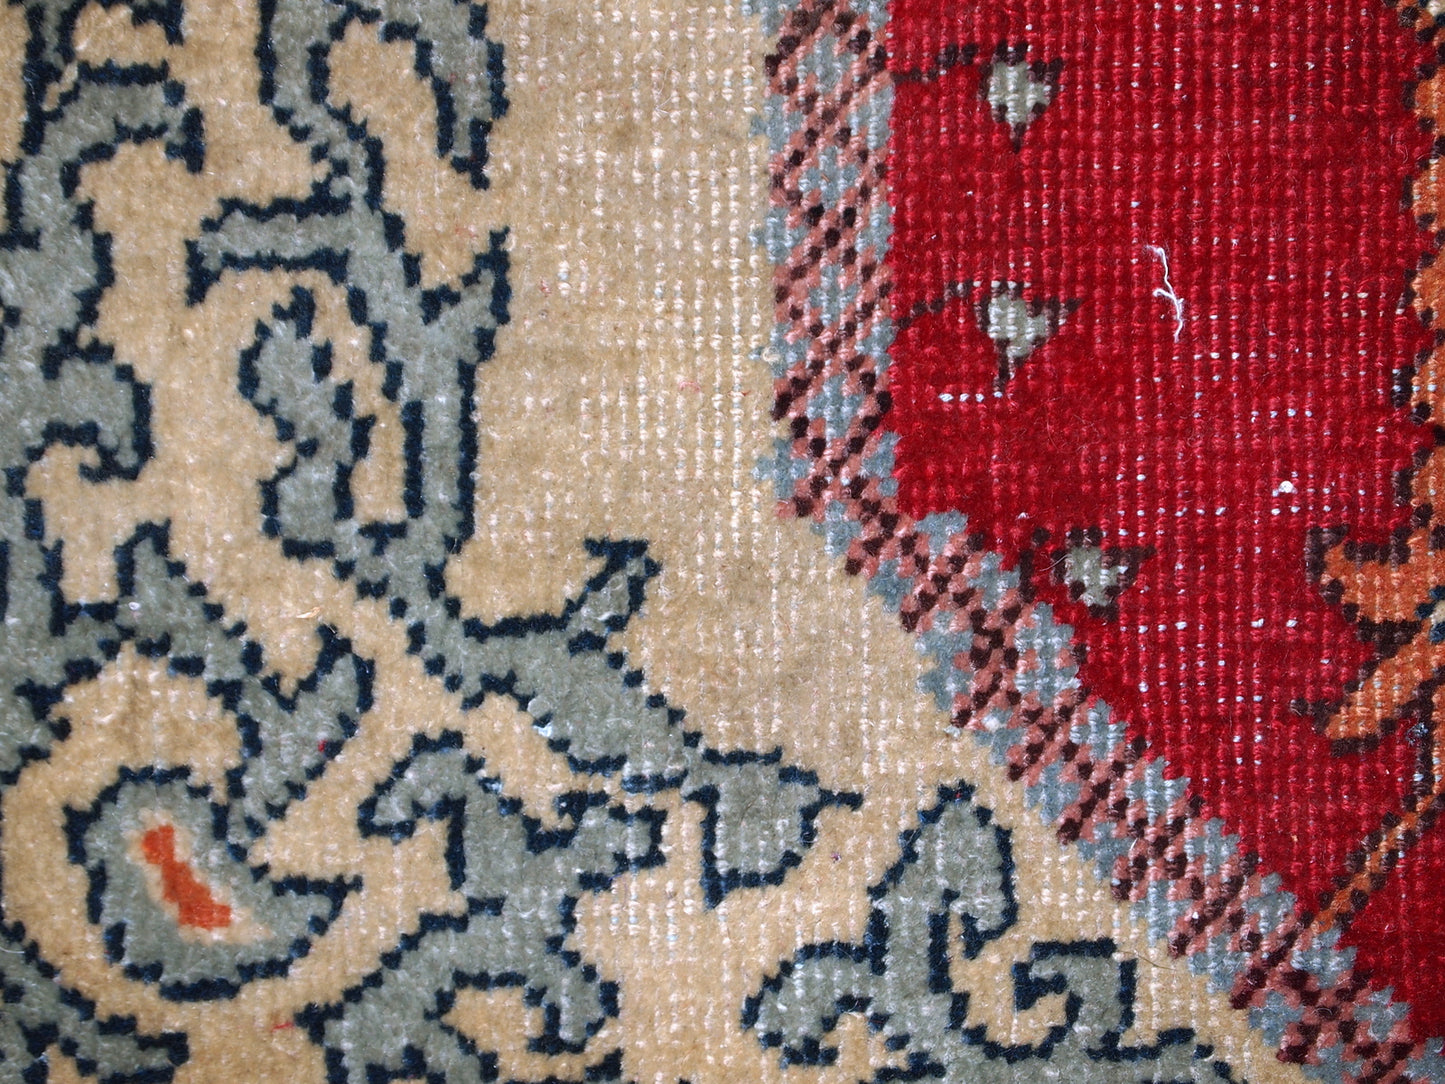 Antique Turkish Konya rug in bright red shade. It has some low pile, but generally in original good condition.